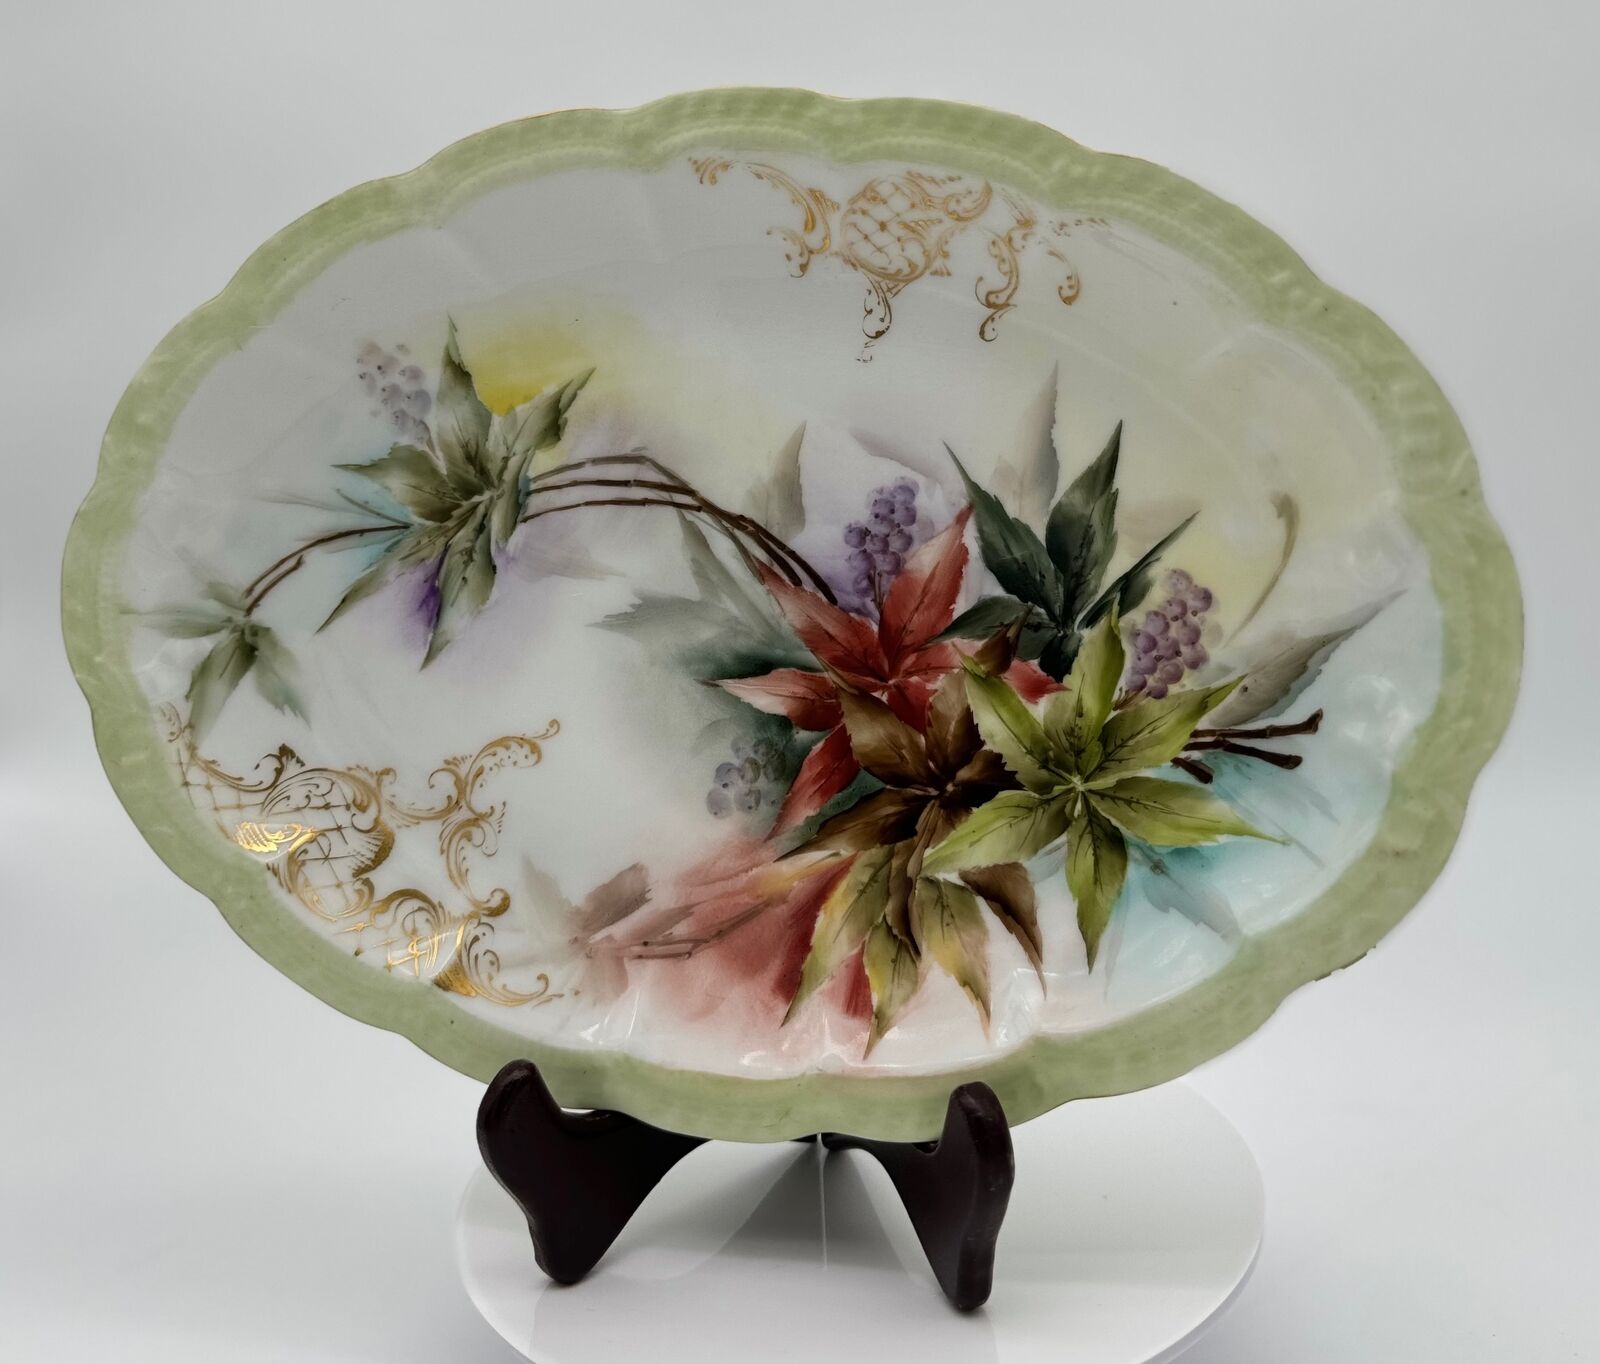 Antique Haviland & Co. Hand-Painted Oval Platter with Floral Design